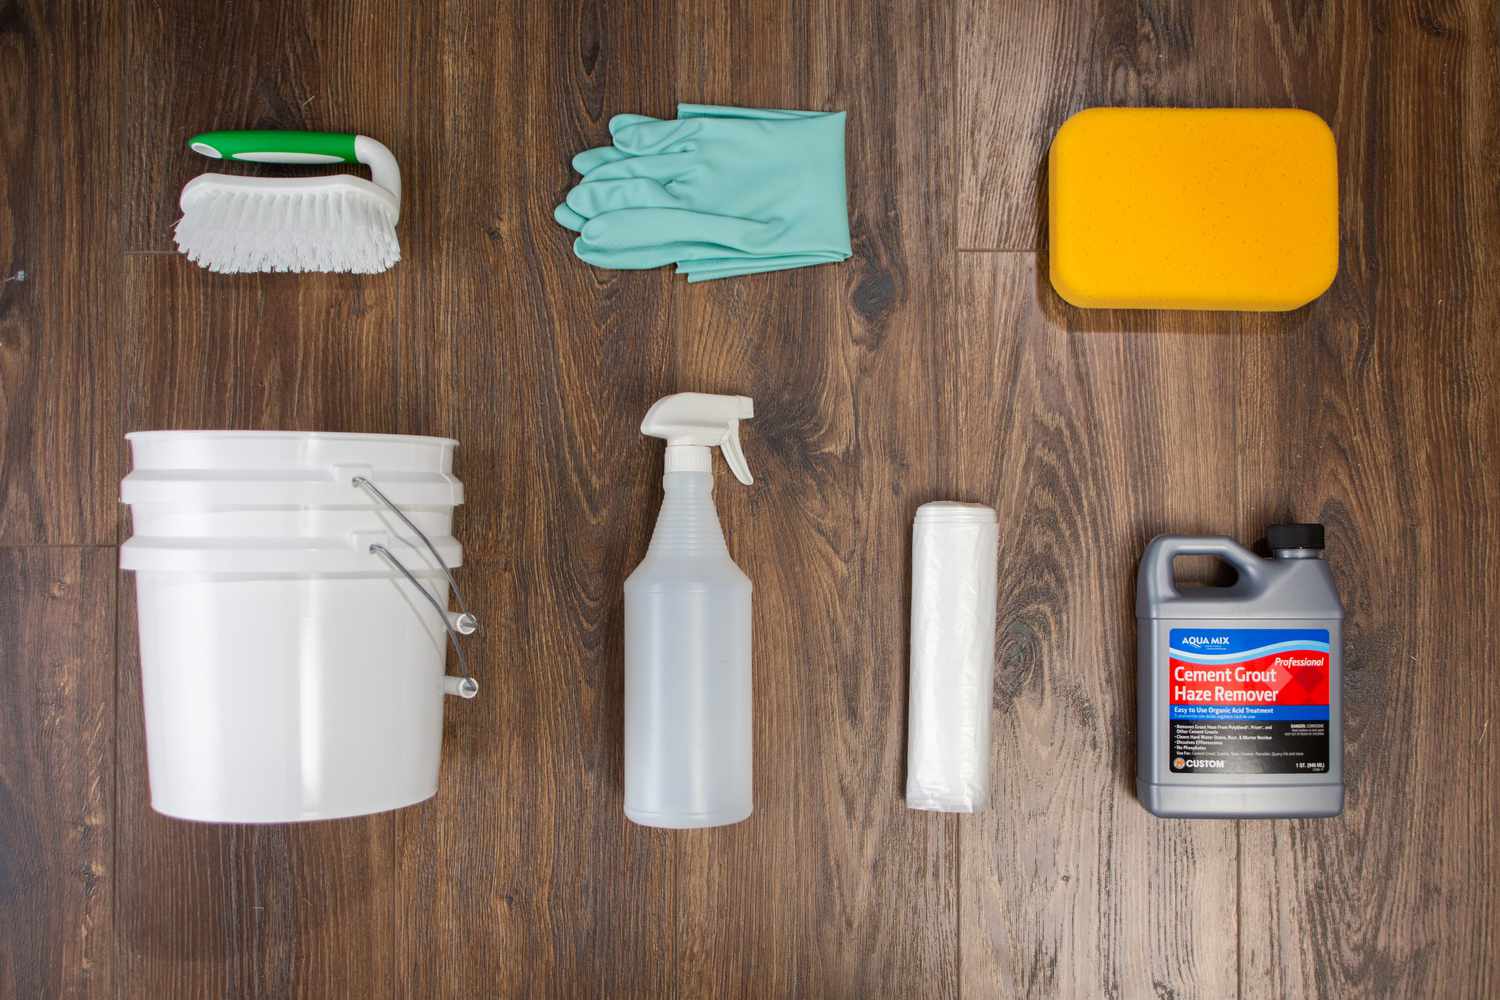 Tools and materials for getting grout haze off tile